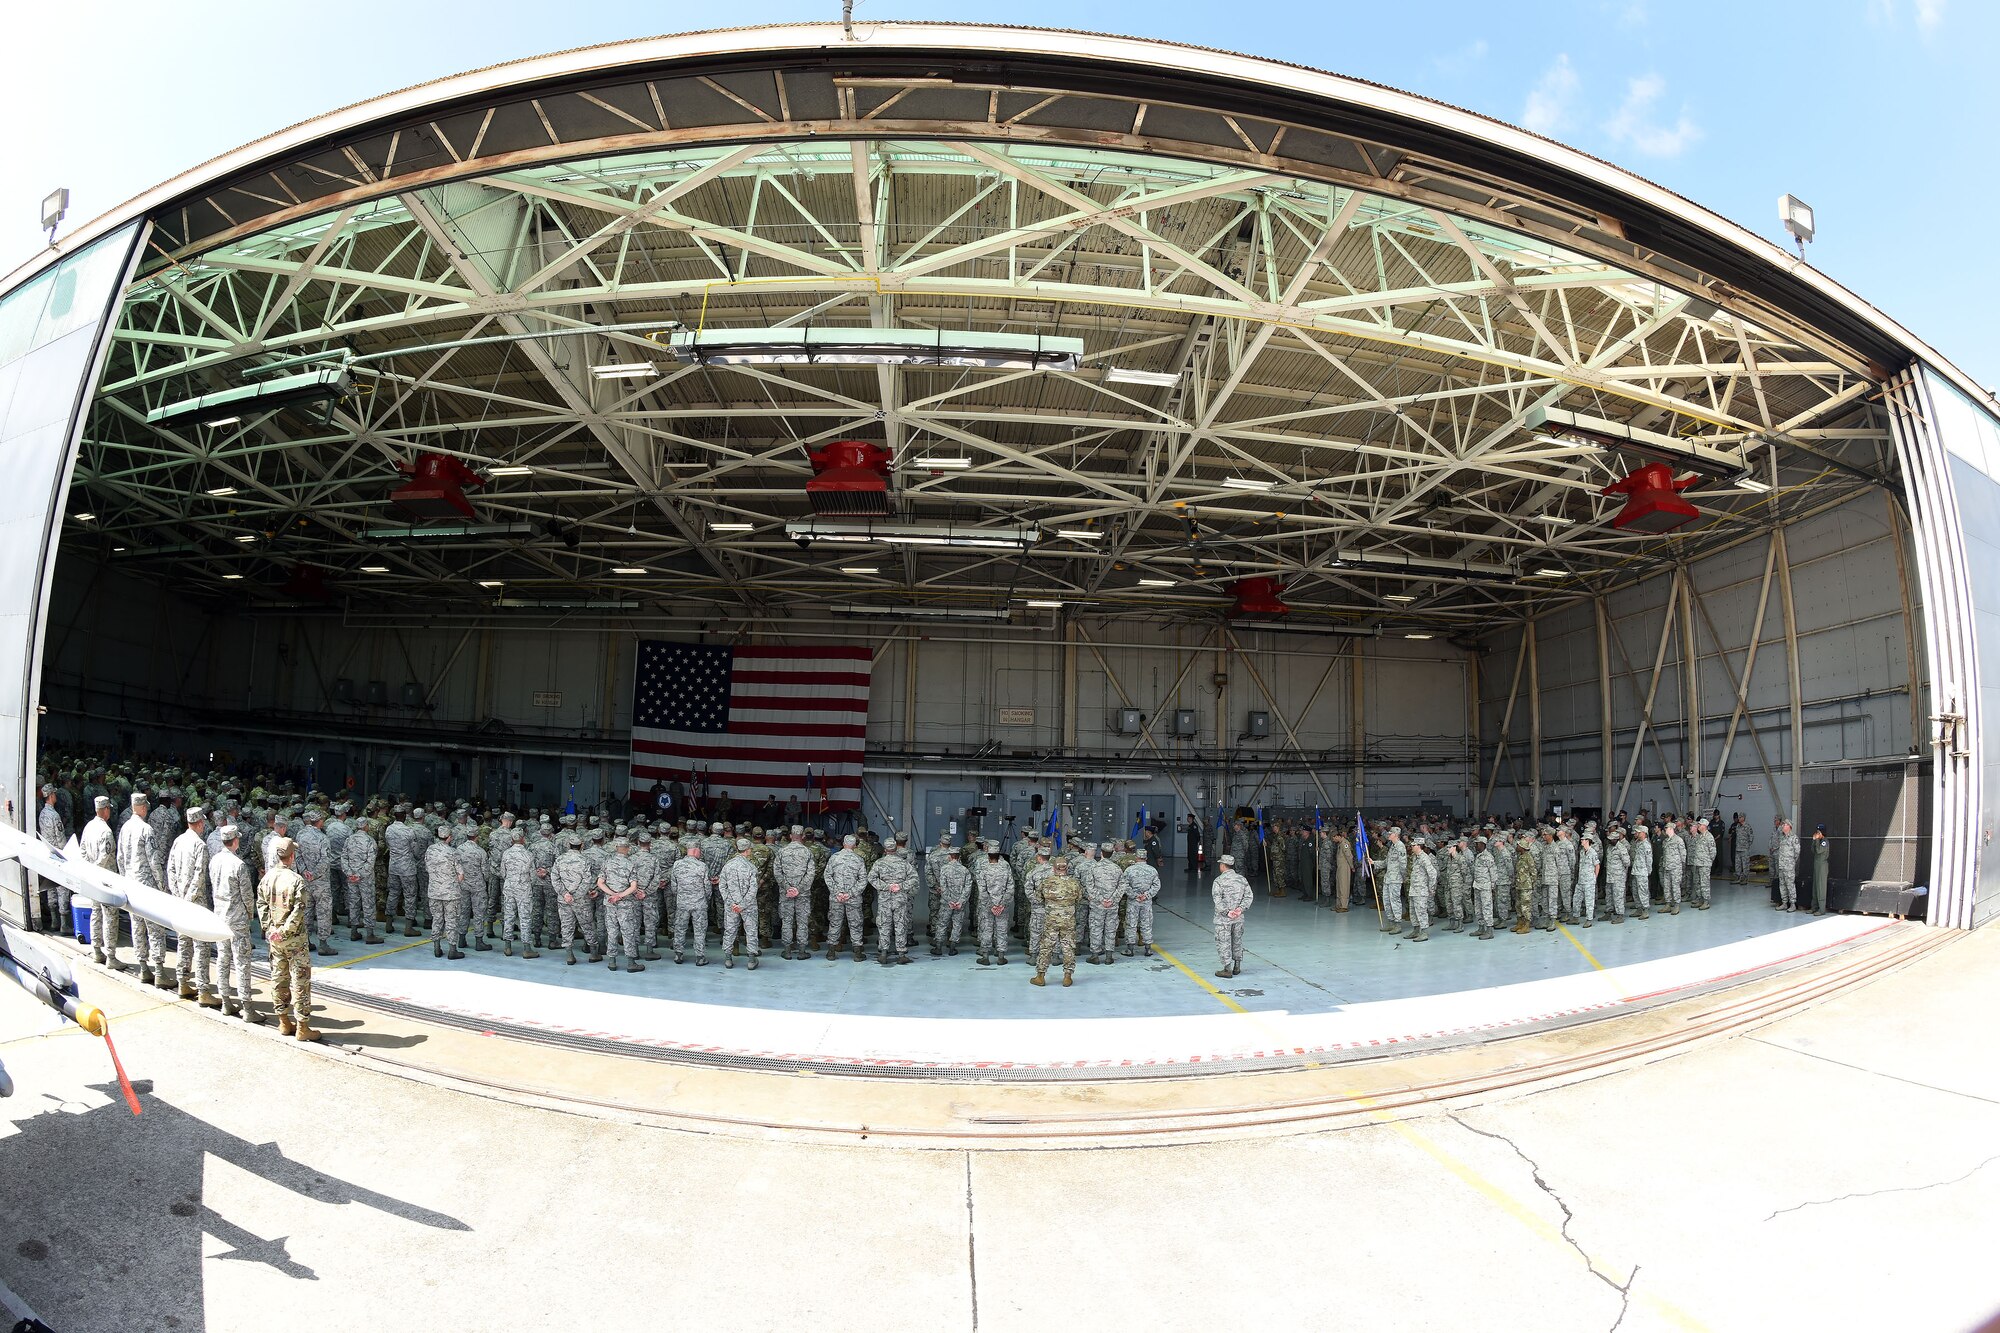 U.S. Airmen of the 169th Fighter Wing and the South Carolina Air National Guard, assemble for a change of command ceremony at McEntire Joint National Guard Base, S.C., June 23, 2018. Col. Nicholas Gentile Jr. relinquishes command of the 169th Fighter Wing to Col. Akshai Gandhi. (U.S. Air National Guard photo by Ashleigh Pavelek)